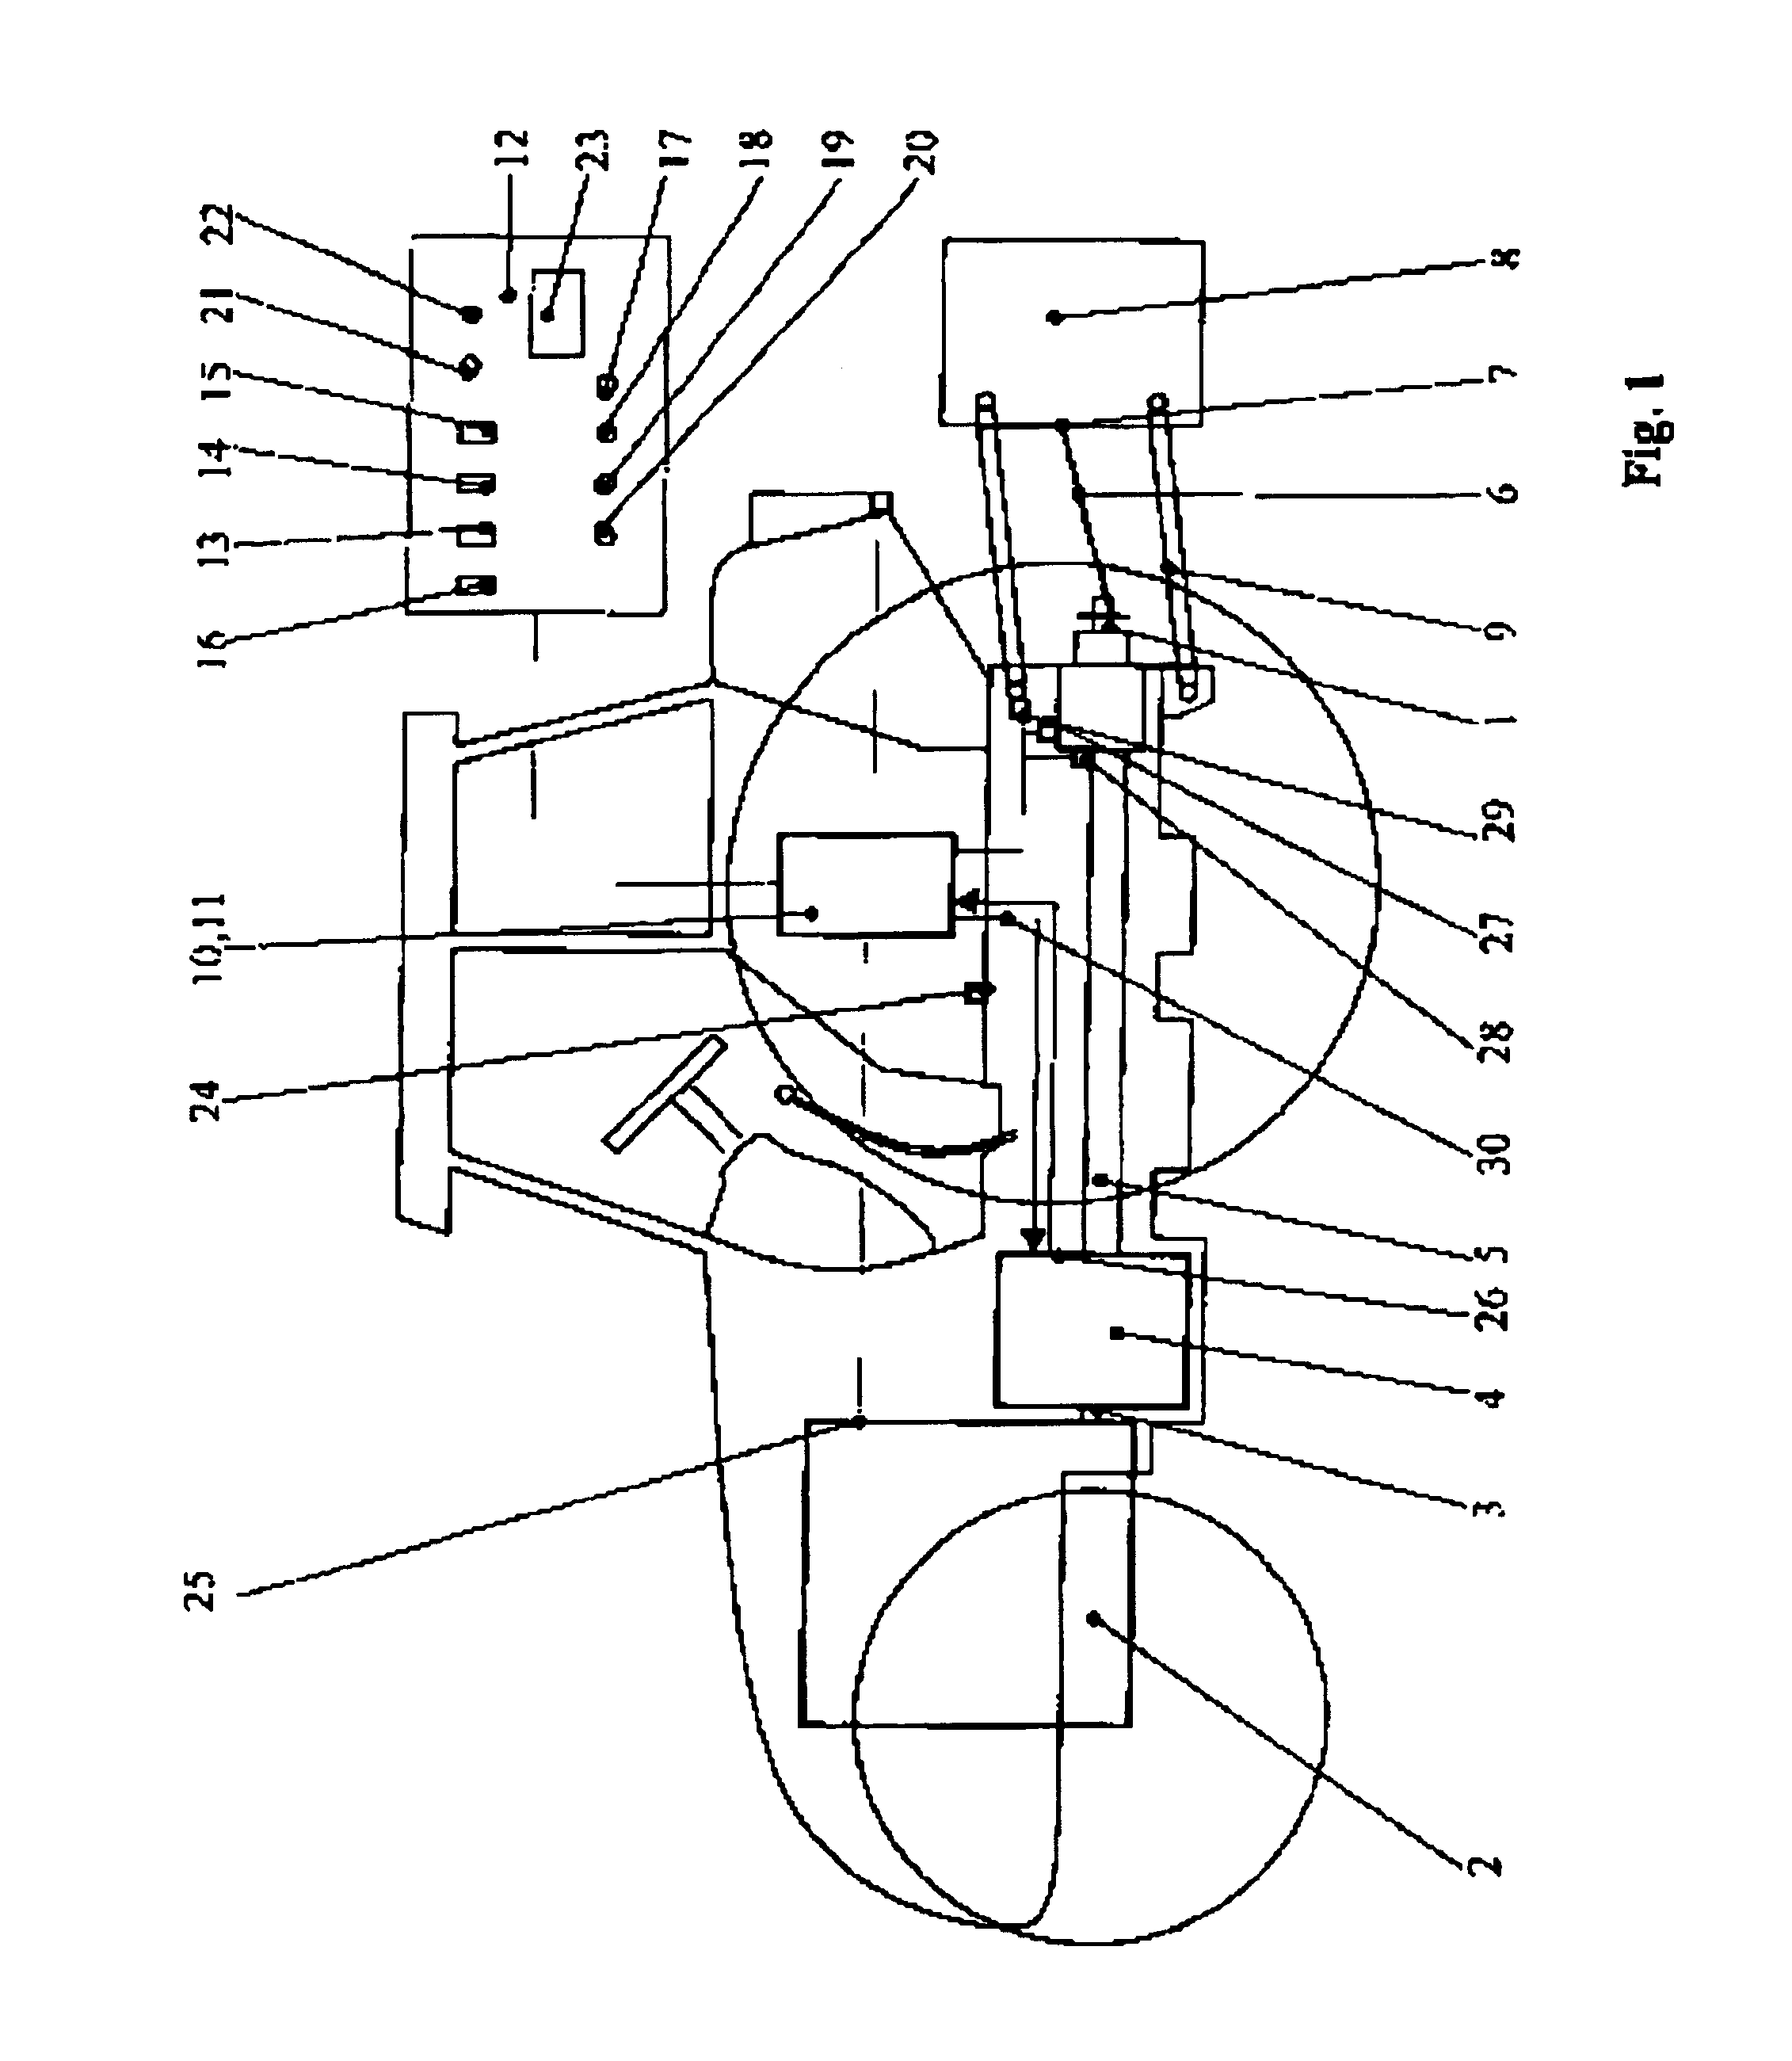 Control system for the drive of a pto for an agricultural vehicle